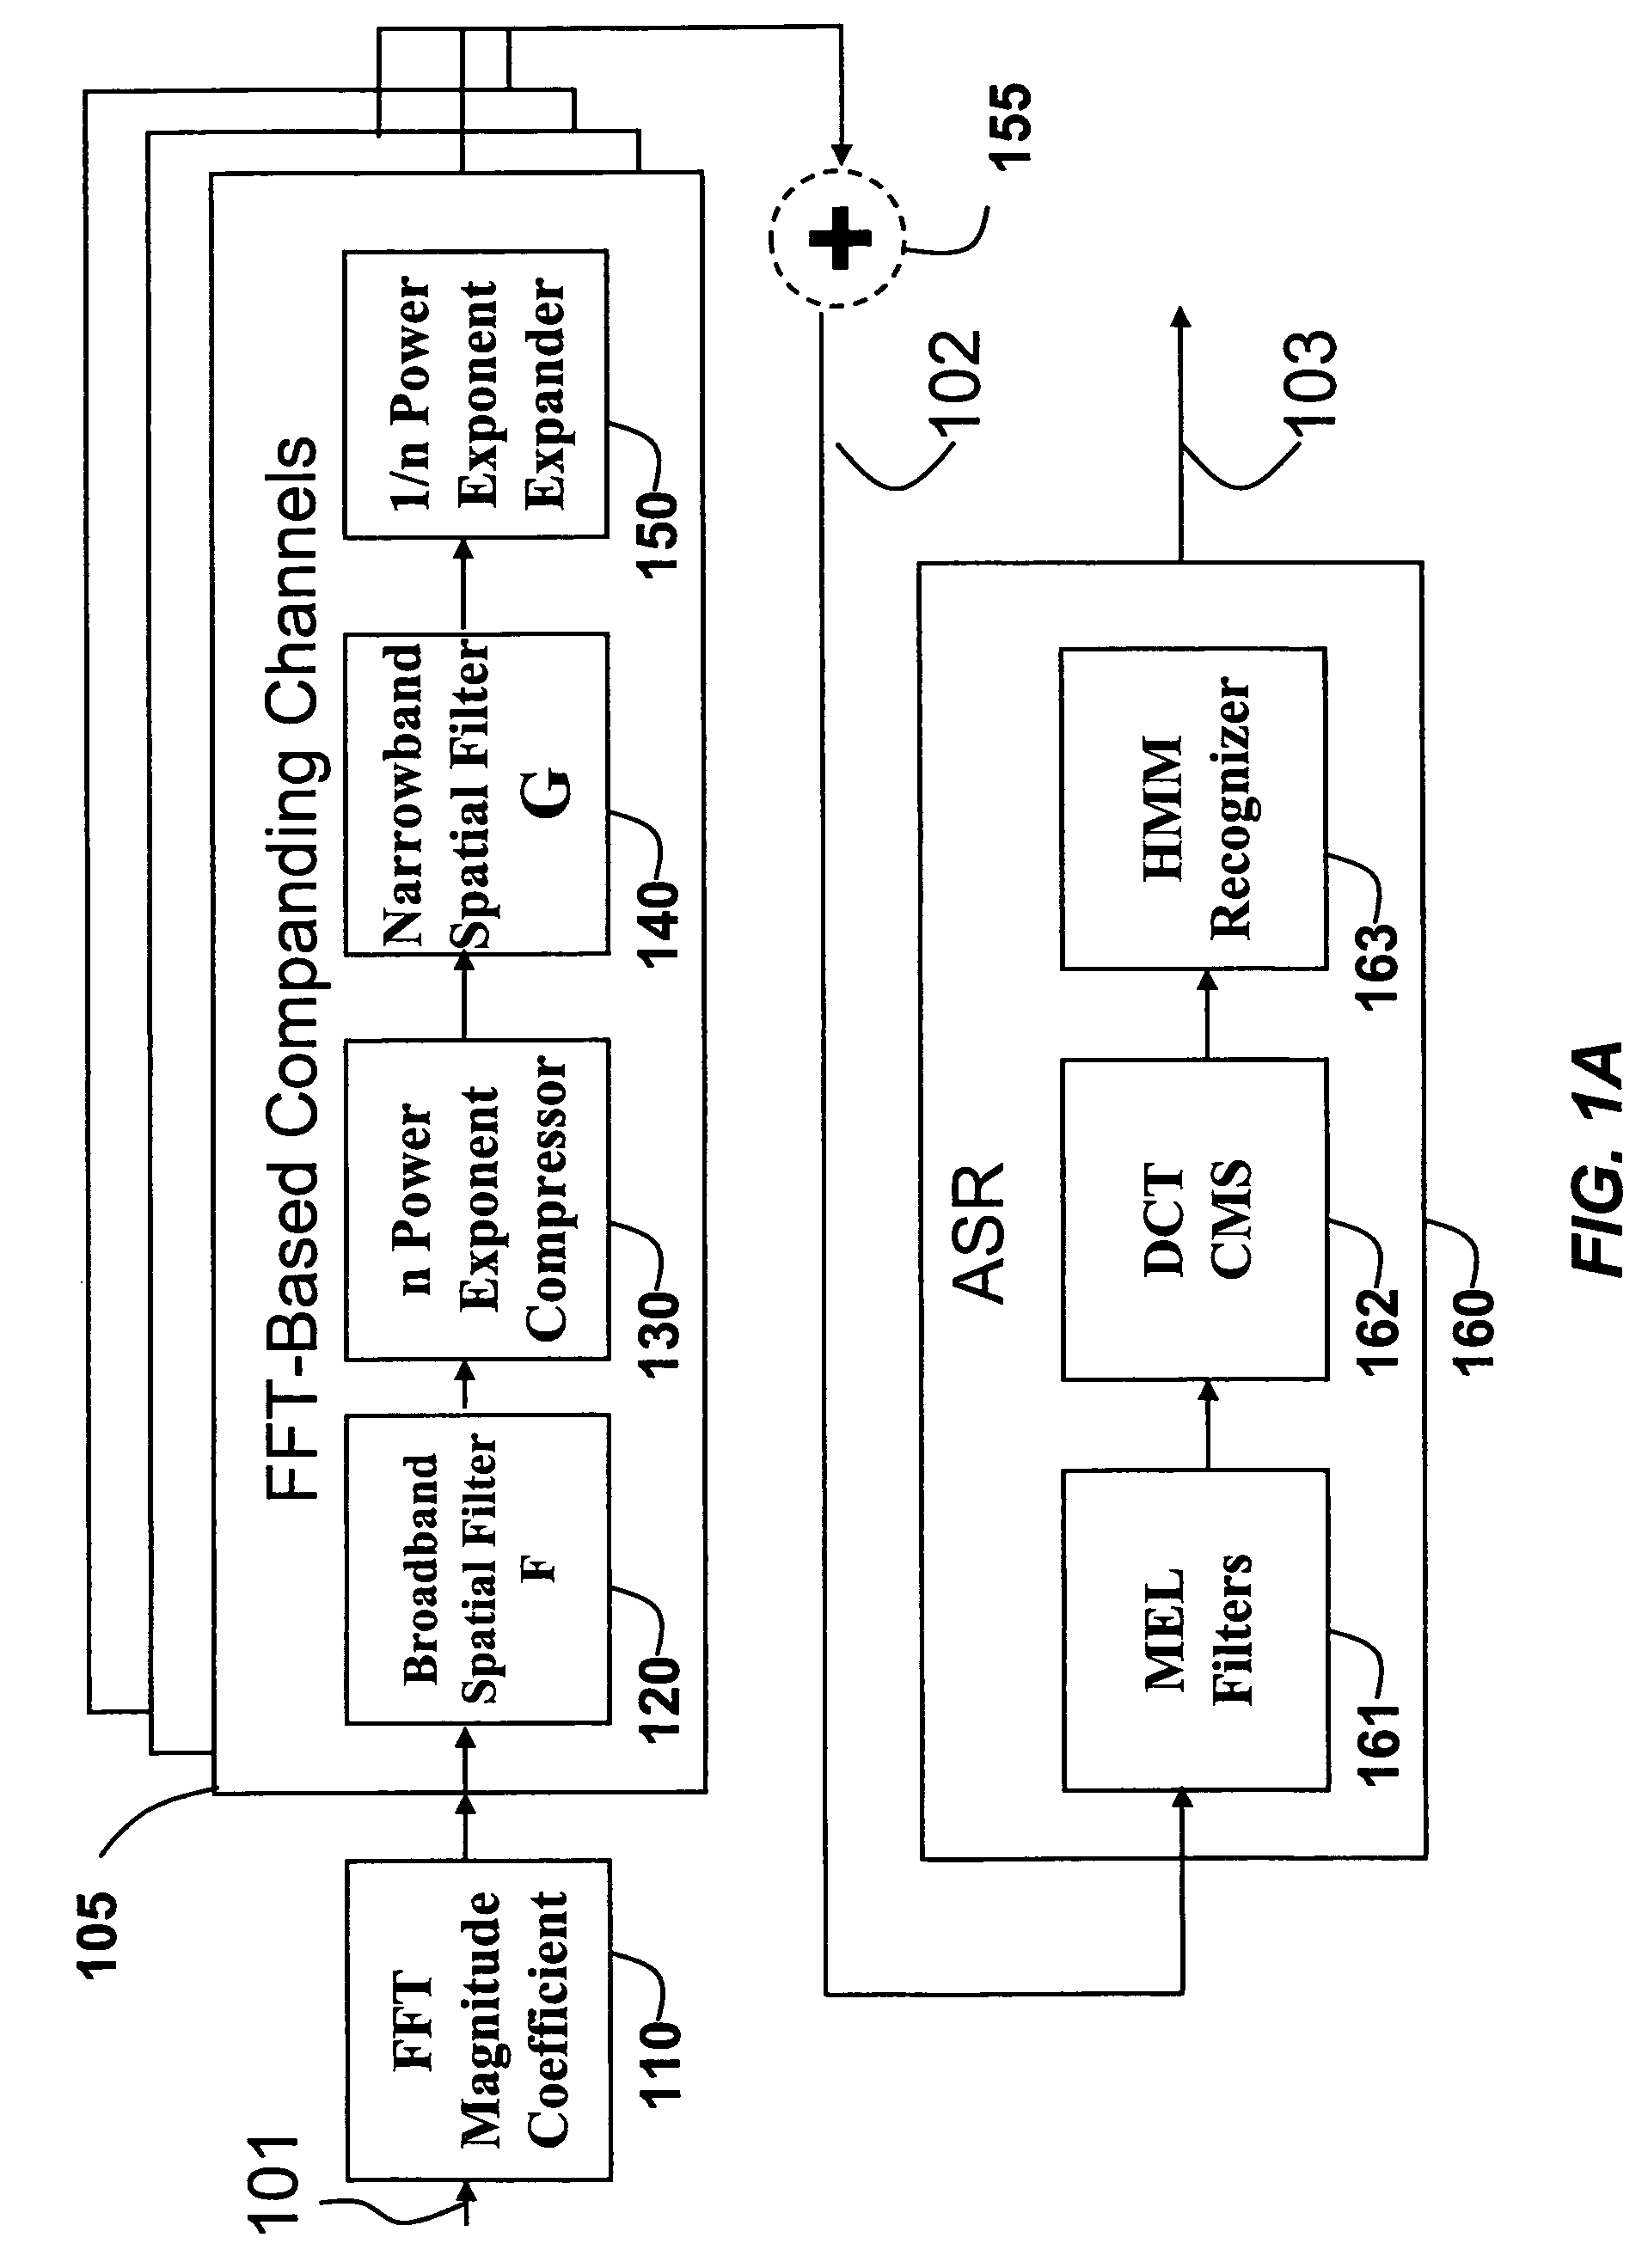 Method and system for FFT-based companding for automatic speech recognition